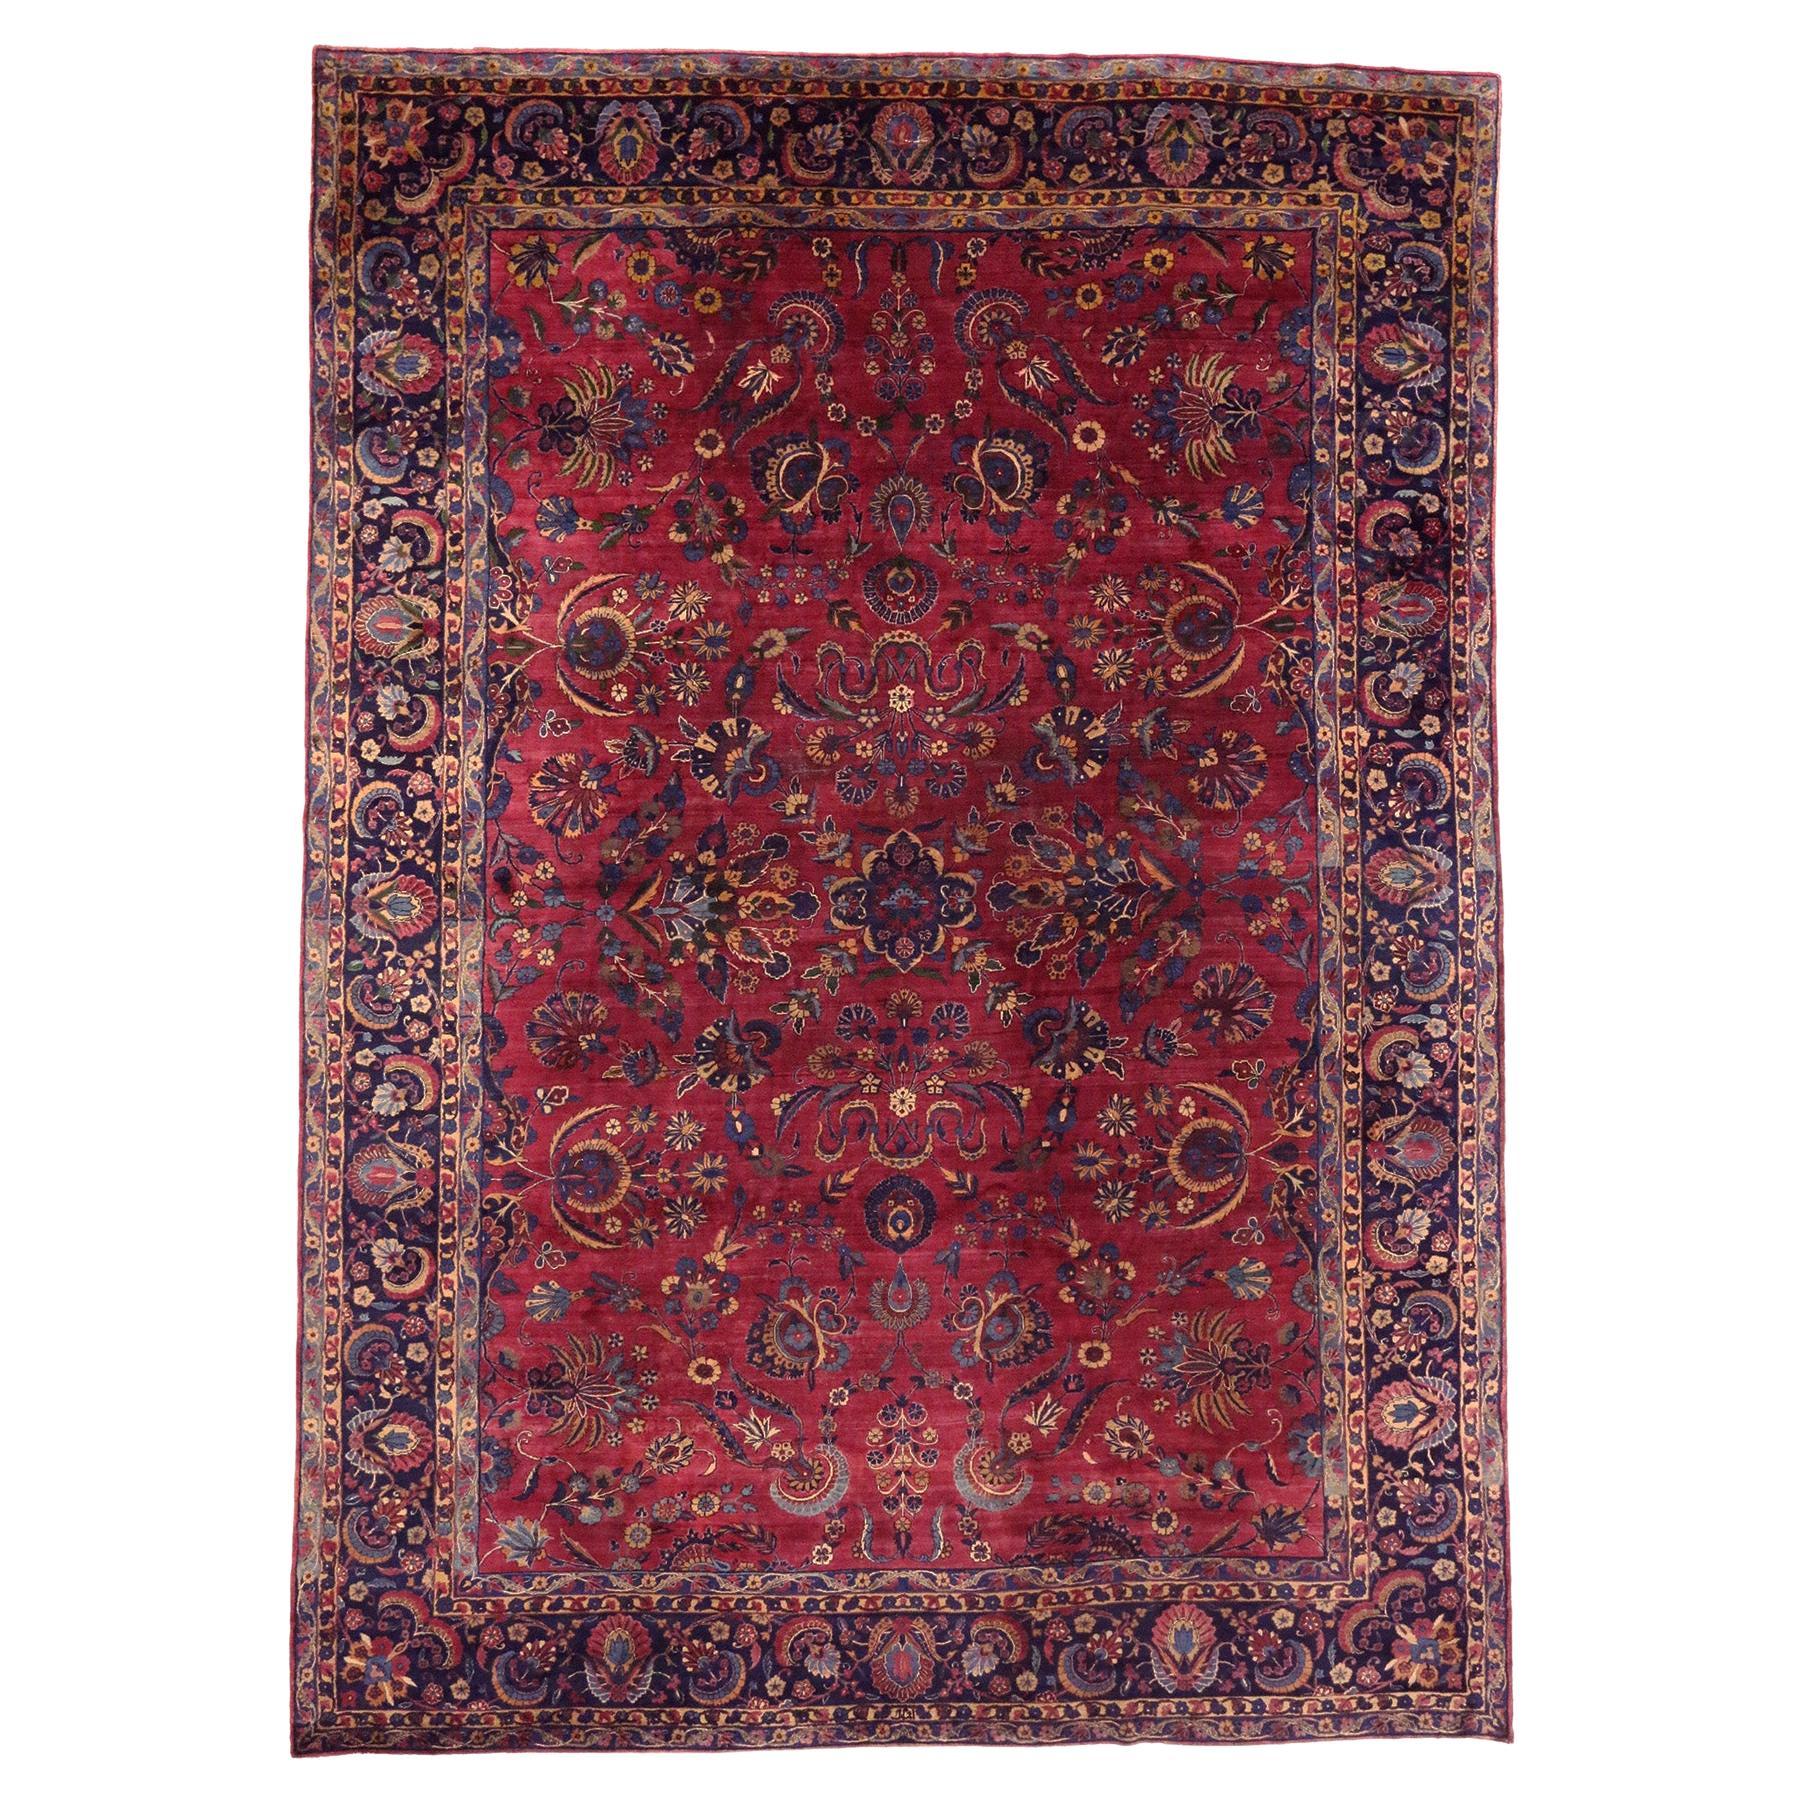 Antique Burgundy Persian Yazd Rug with Victorian Renaissance Style For Sale